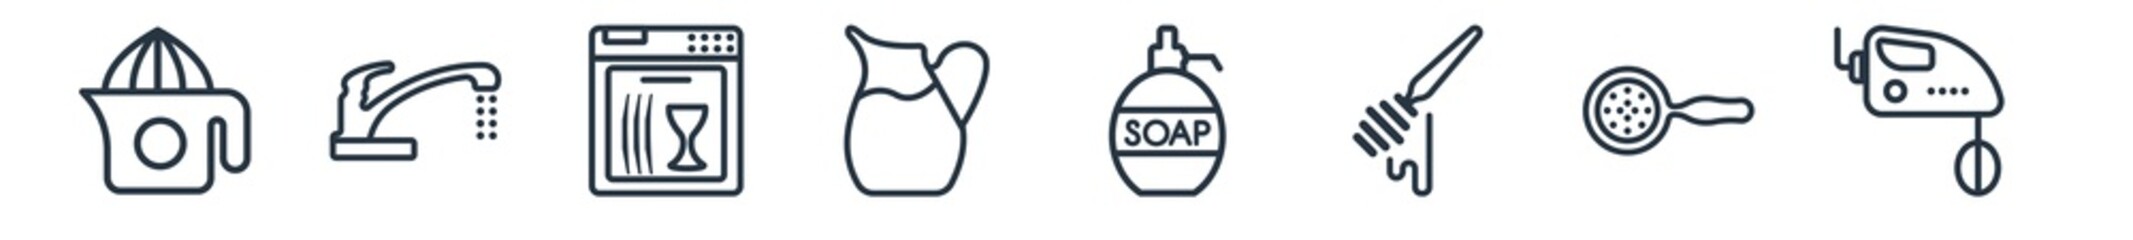 linear set of kitchen outline icons. line vector icons such as squeezer, kitchen tap, dishwasher, pitcher, liquid soap, mixer vector illustration.